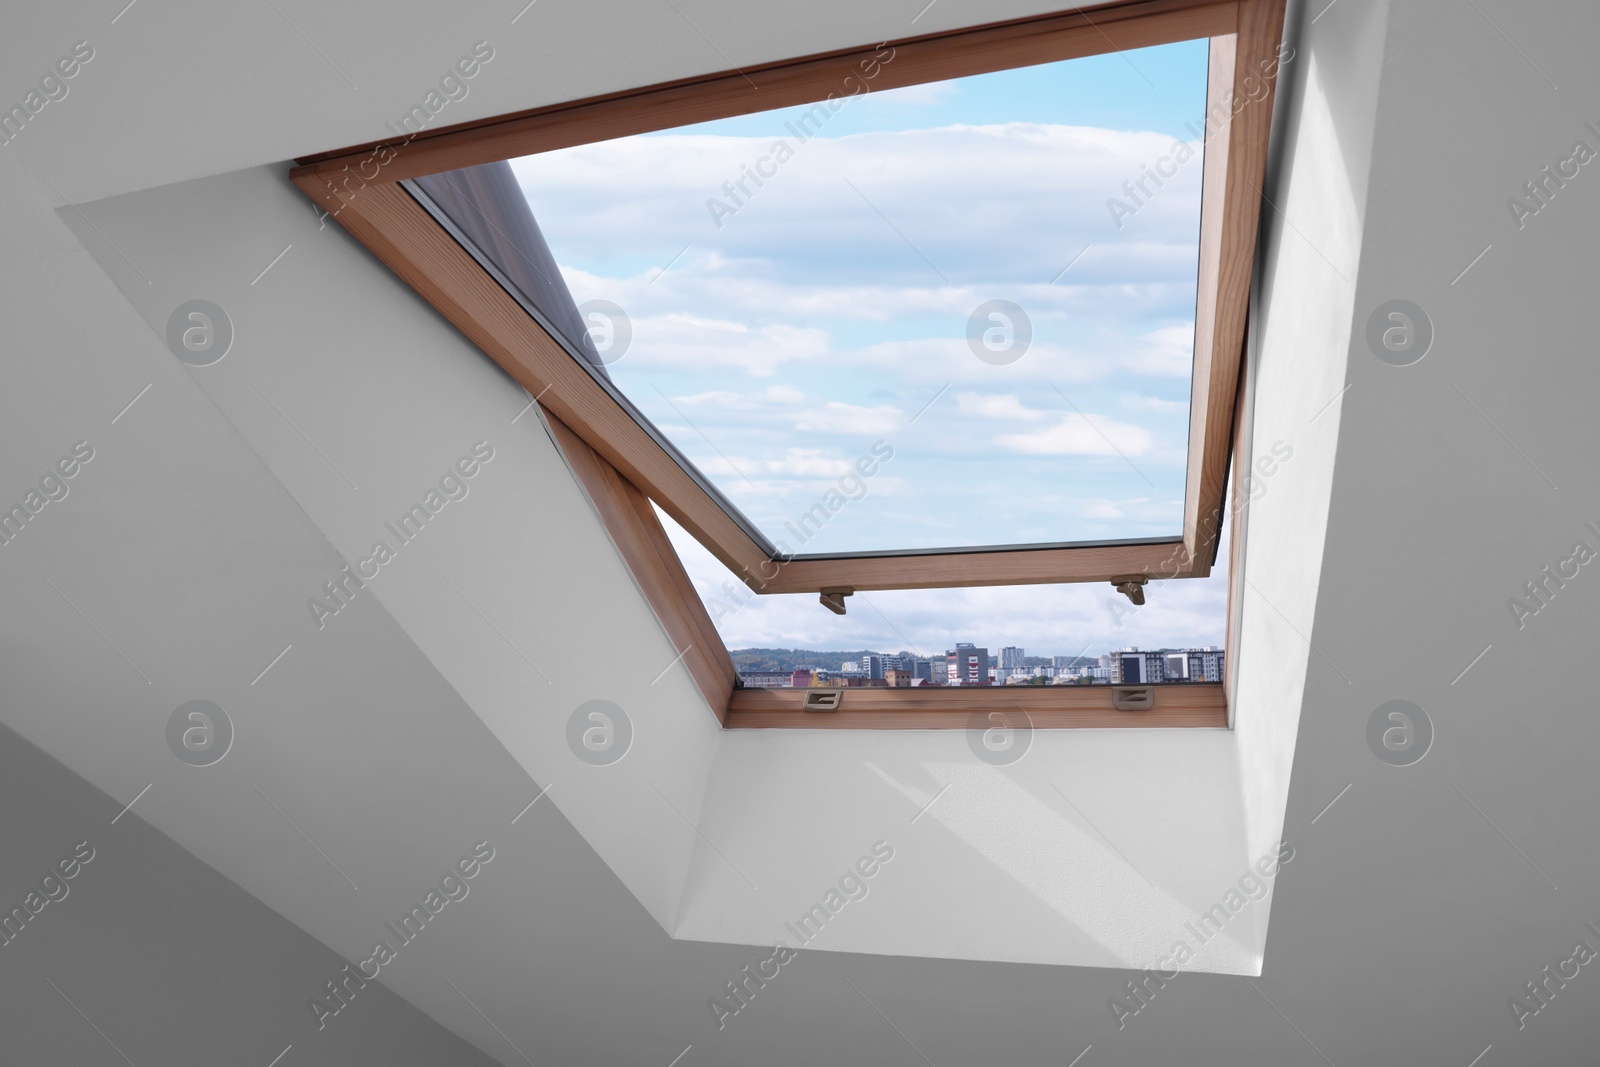 Photo of Open skylight roof window on slanted ceiling in attic room